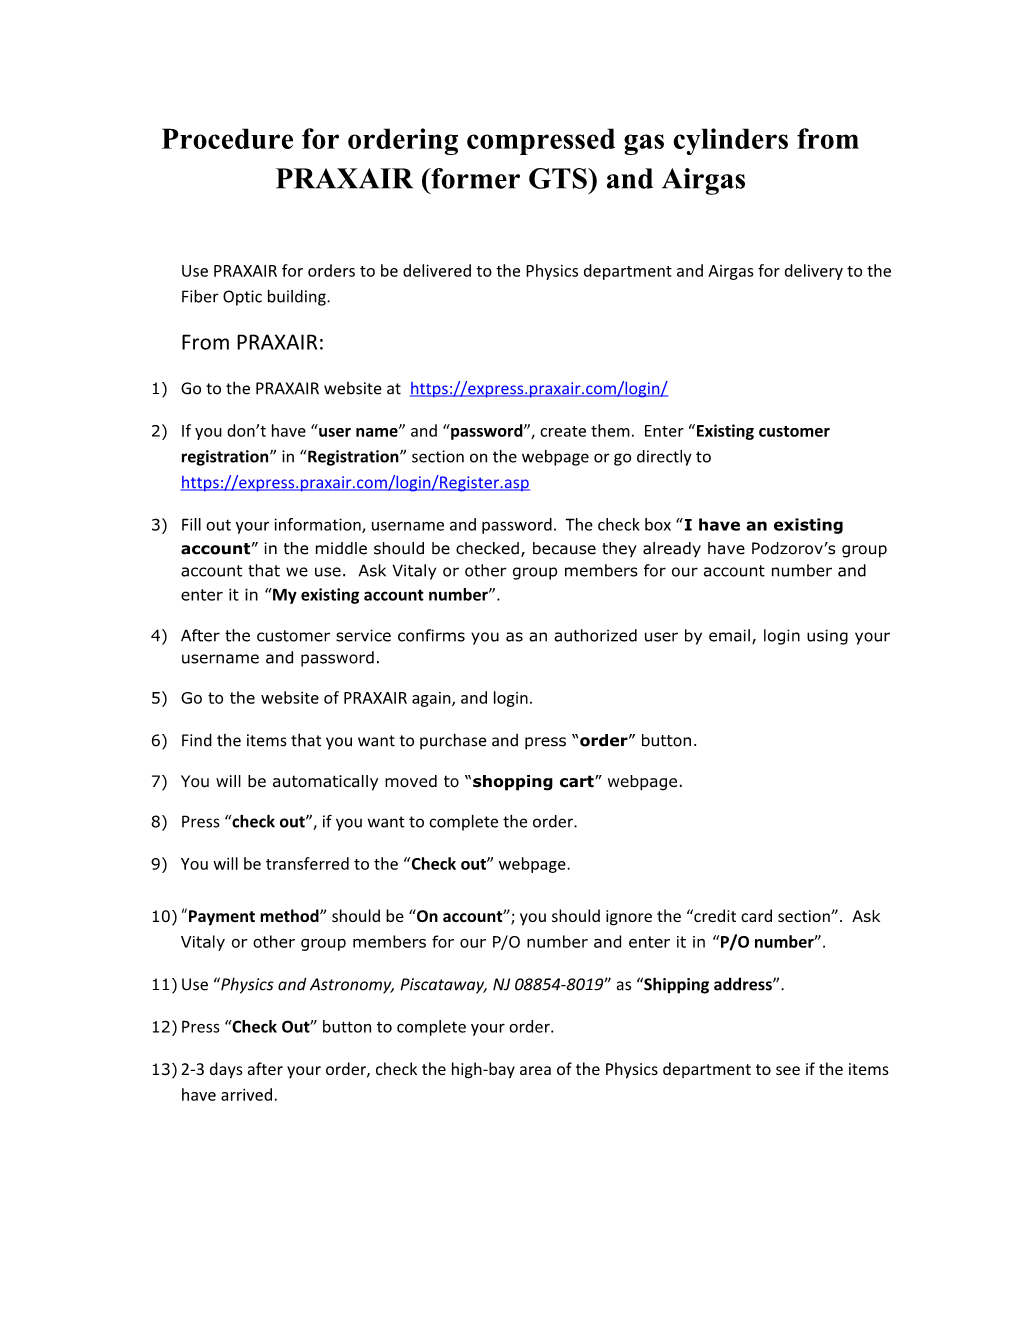 Procedure for Ordering Compressed Gas Cylinders from PRAXAIR